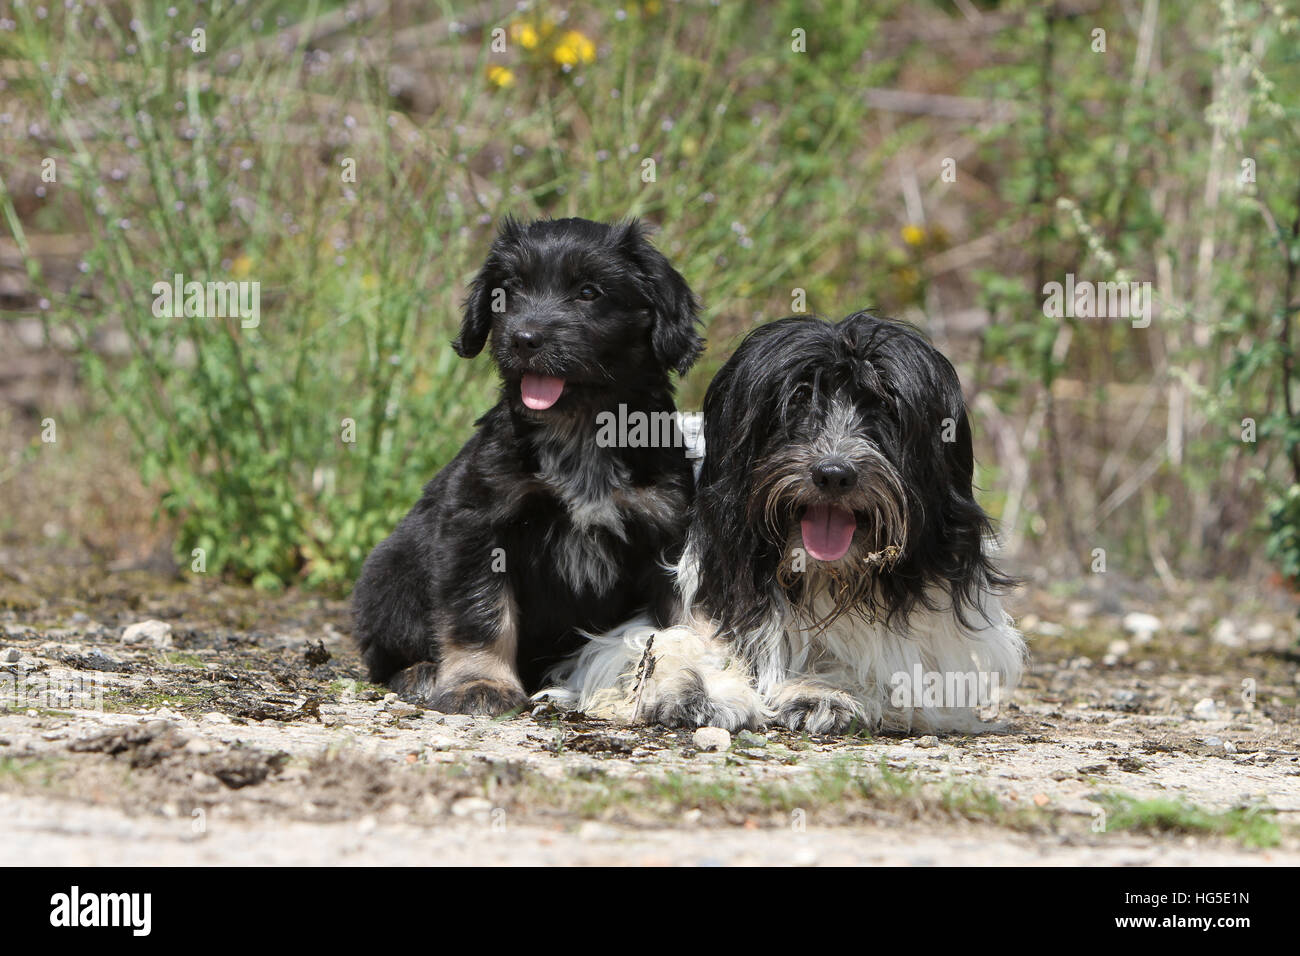 Dog Schapendoes / Dutch Sheepdog adult and puppy sitting natural Stock Photo